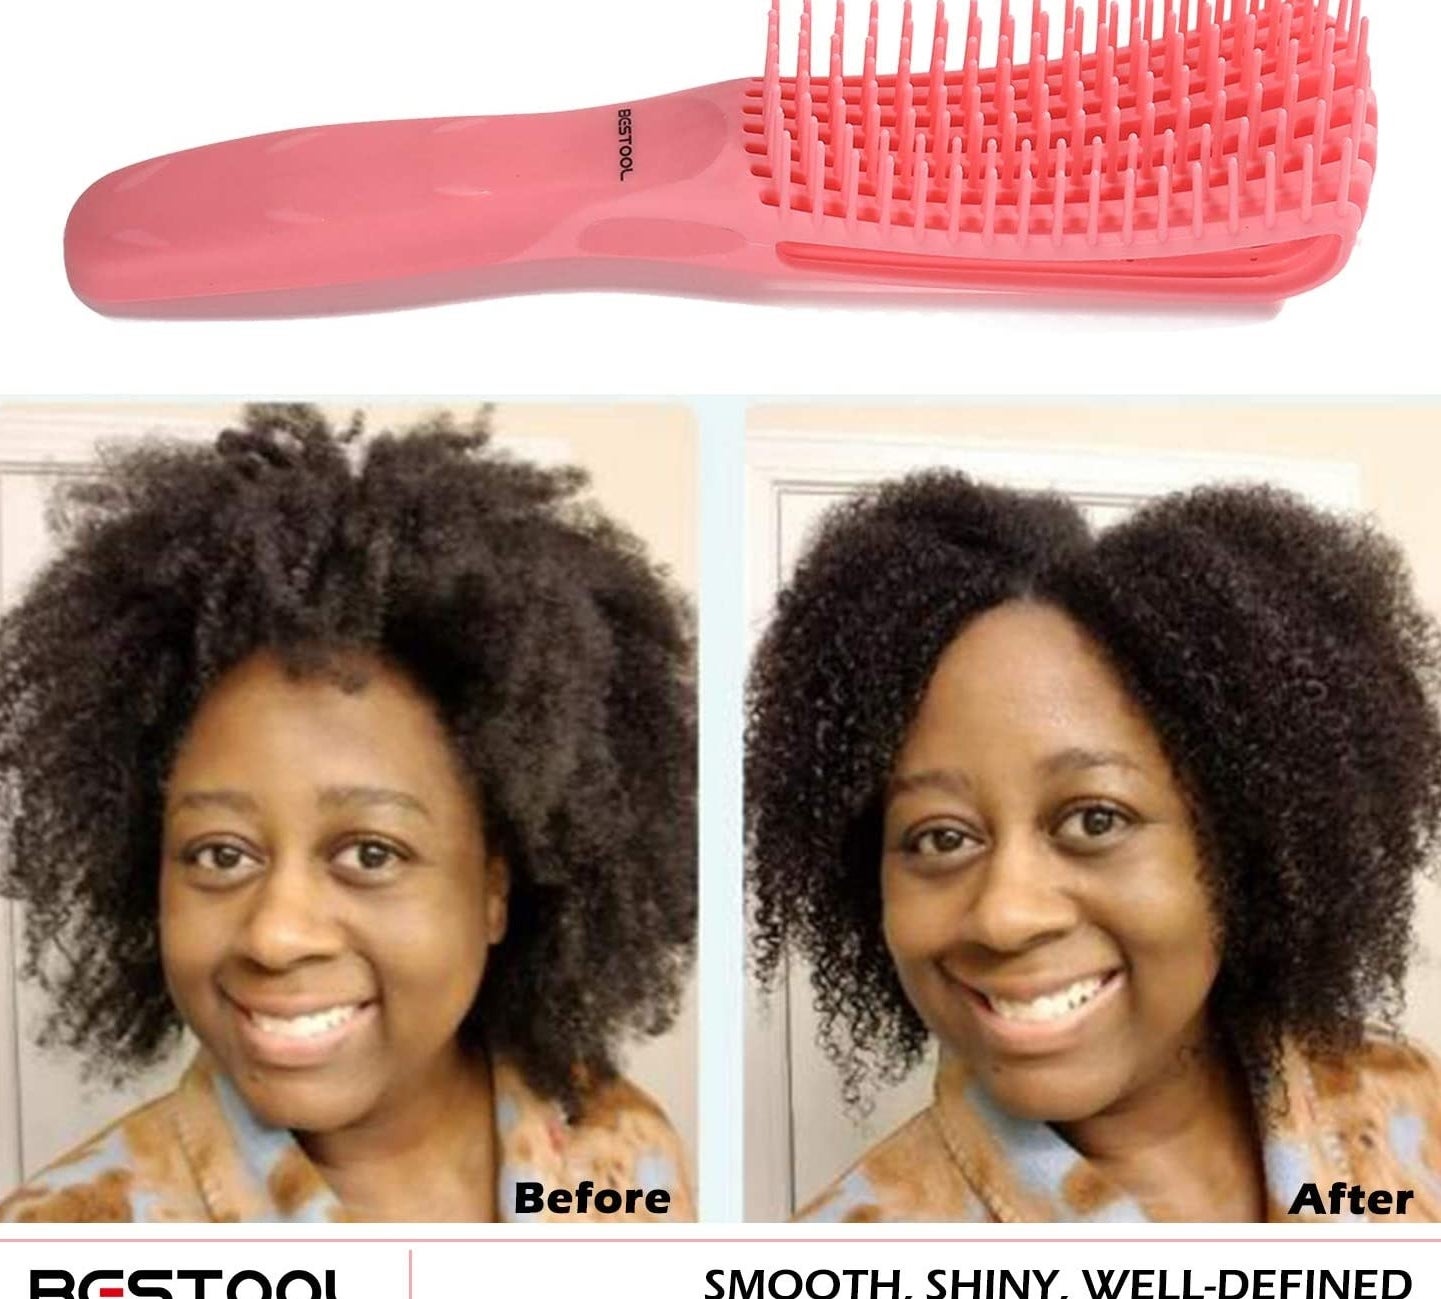 The brush and a comparison showing a person&#x27;s hair before and after using it